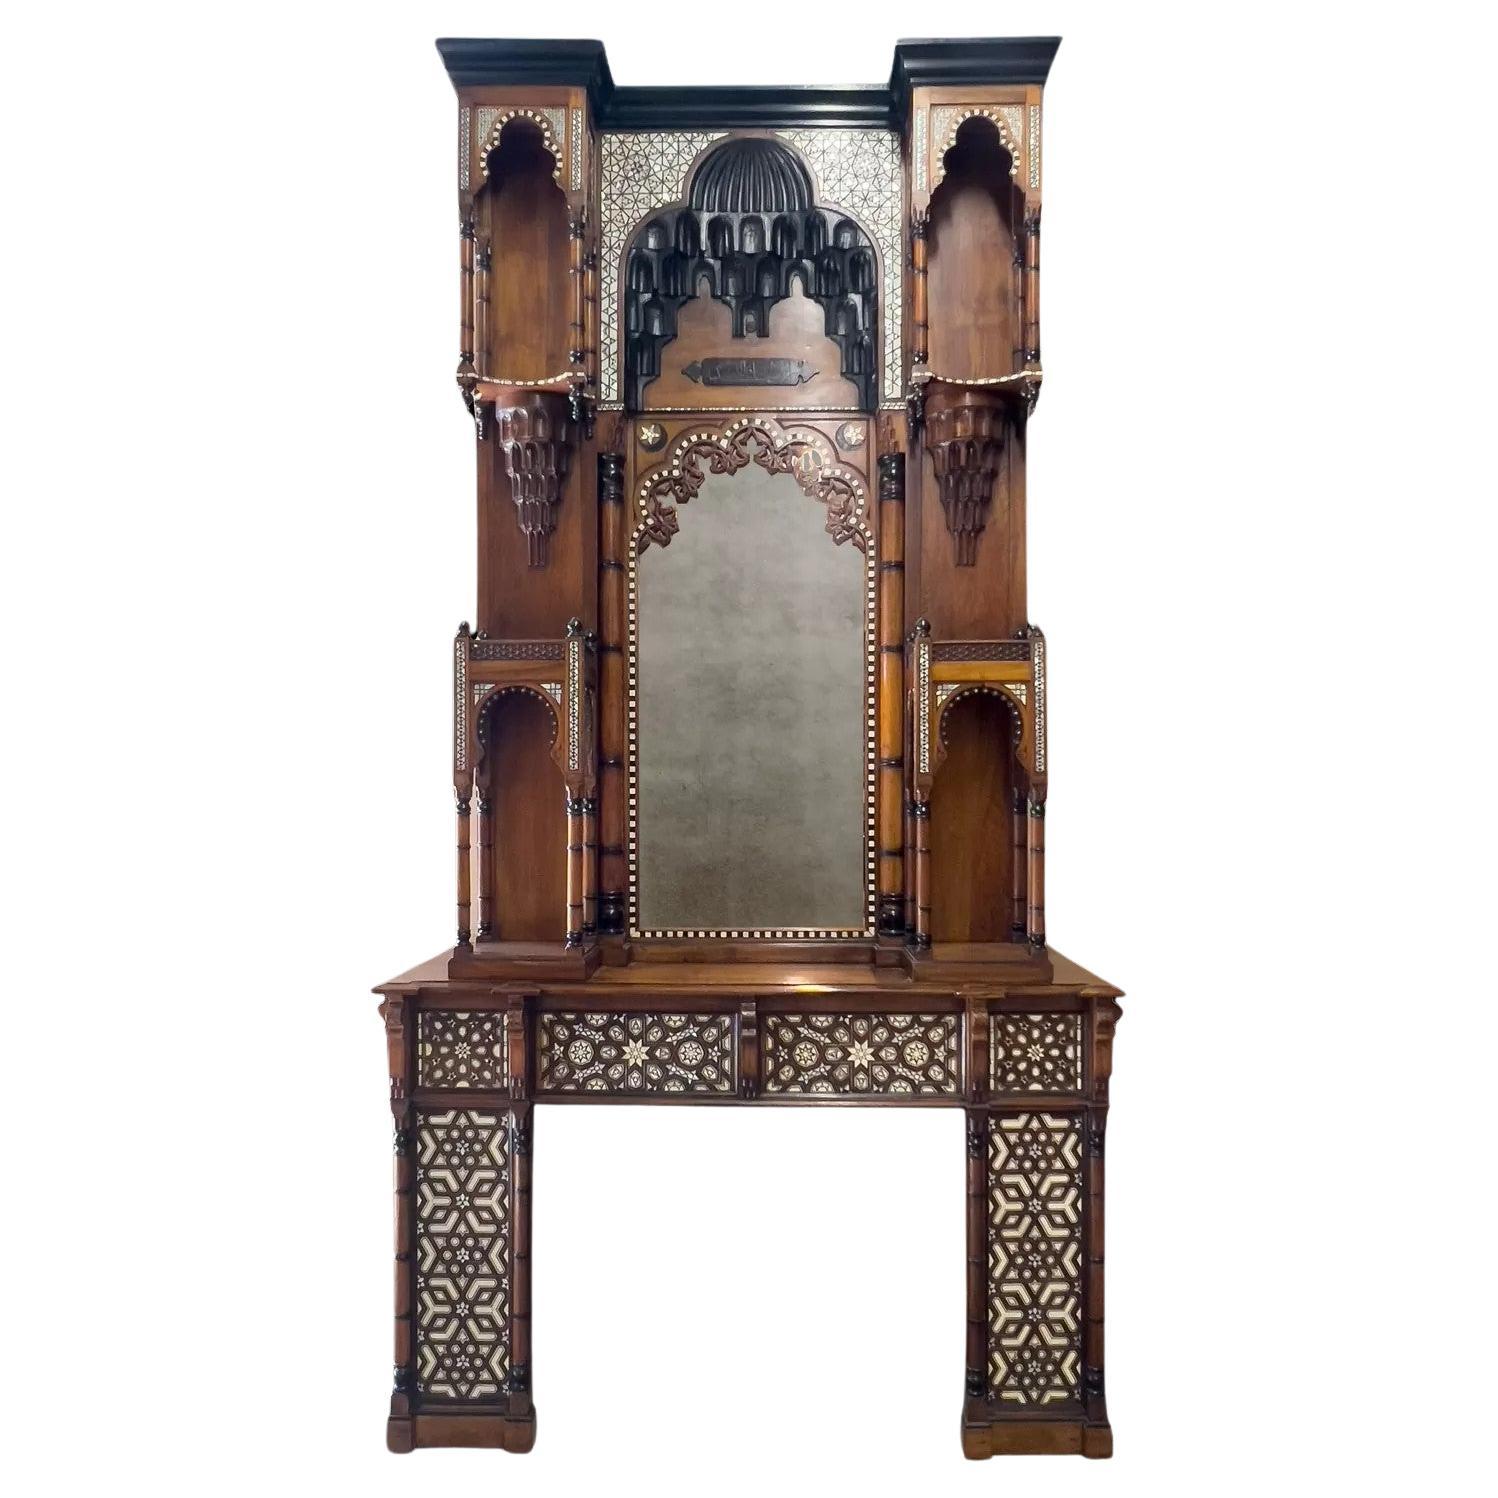 An antique Moorish revival style walnut fireplace with inlays. For Sale